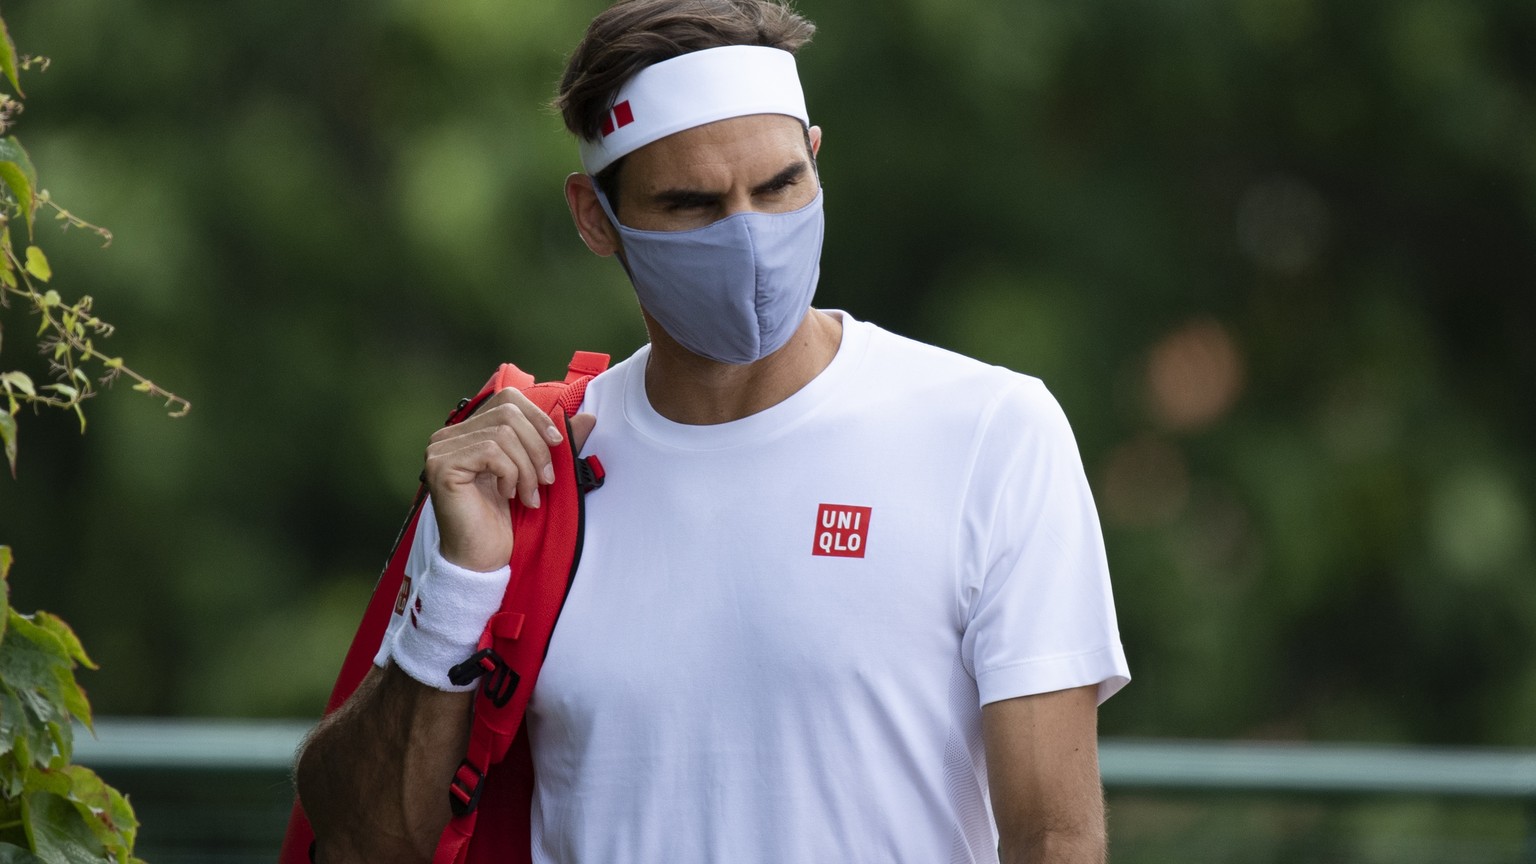 epa09322460 Roger Federer of Switzerland reacts after a training session at the Aorangi Practice Courts at The Wimbledon Championships tennis tournament in Wimbledon, Britain, 04 July 2021. EPA/AELTC  ...